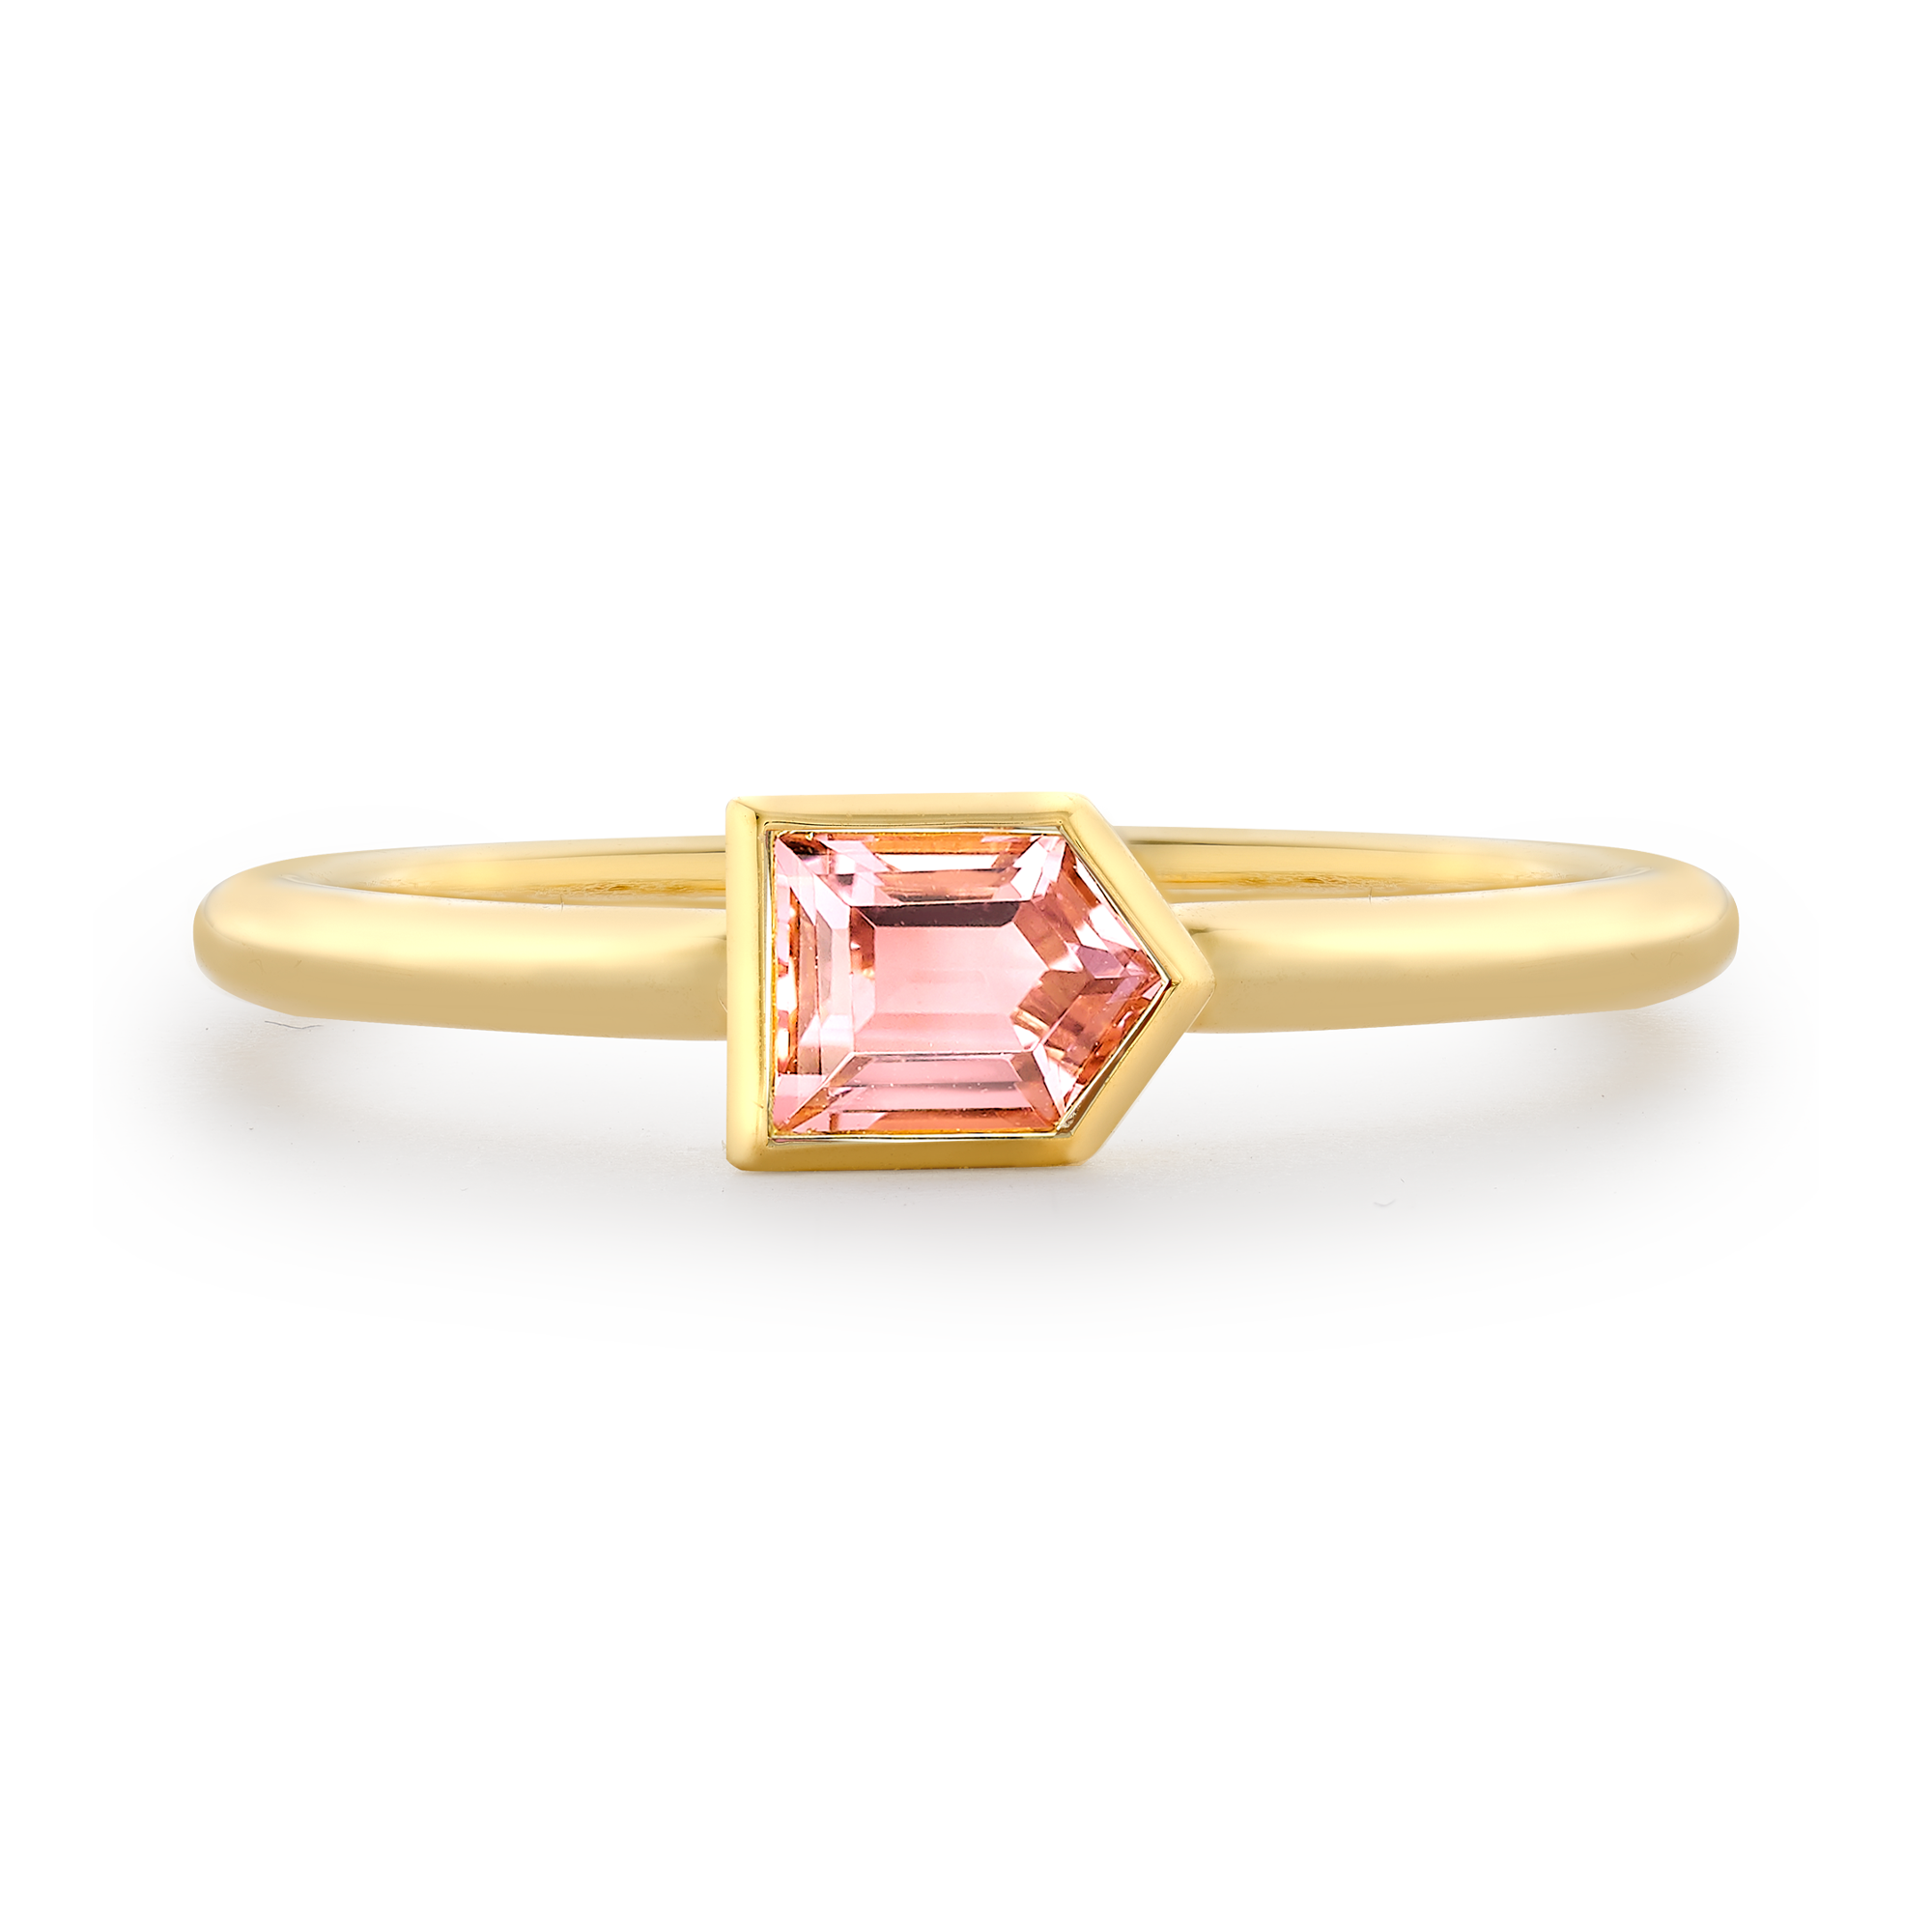 Lady Garden 0.42ct Pink Tourmaline Solitaire Ring Bullet Cut, Rubover Set_2